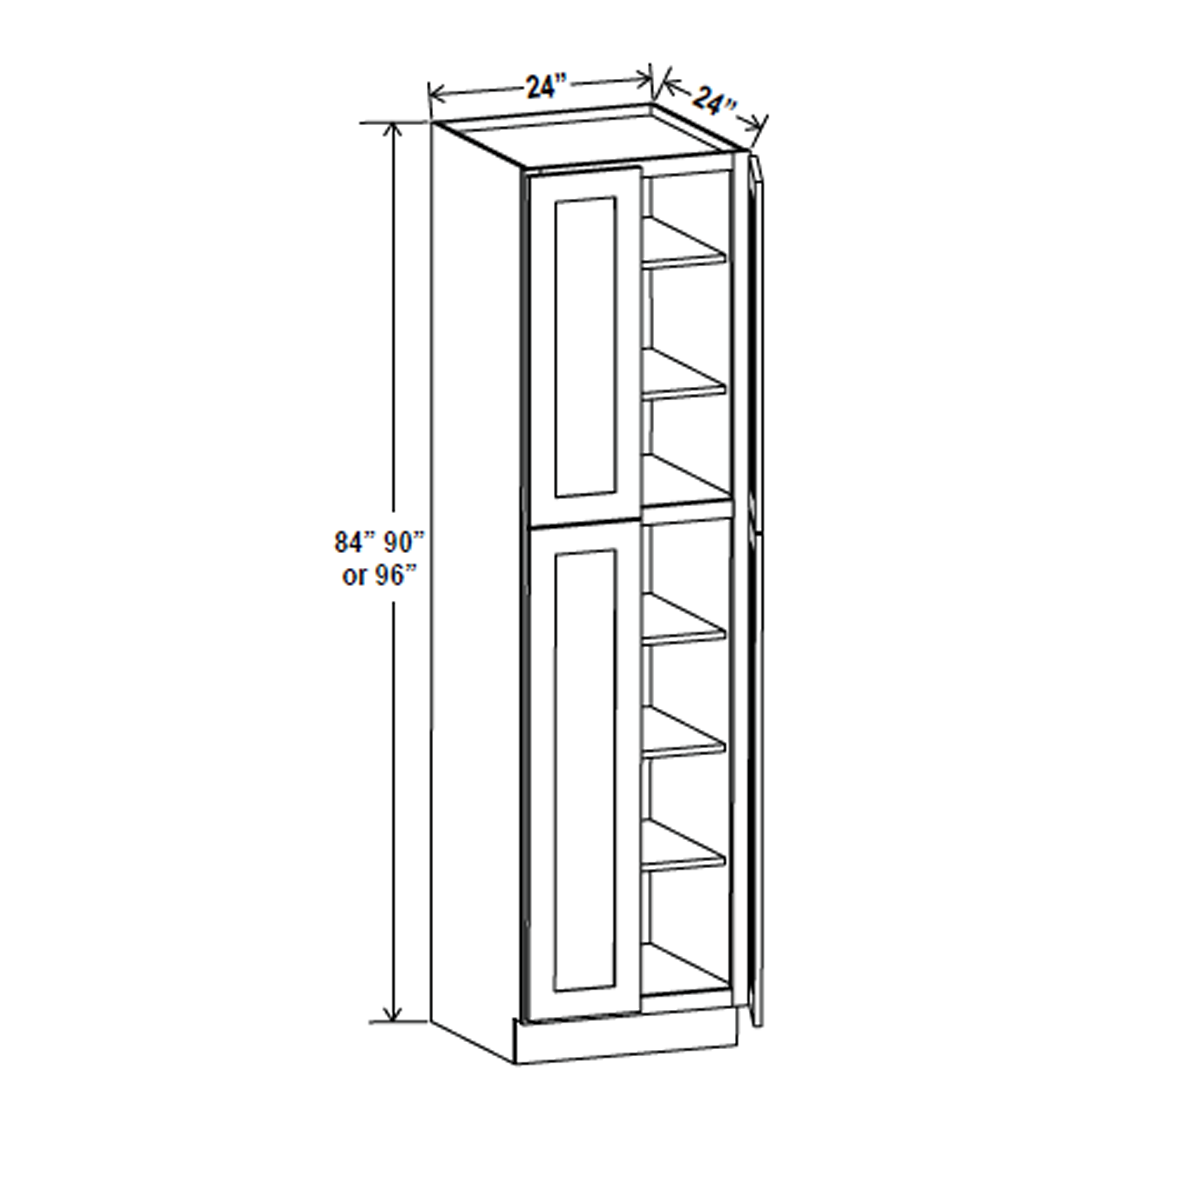 Wall Pantry Cabinet - 24W x 90H x 24D - Grey Shaker Cabinet - RTA